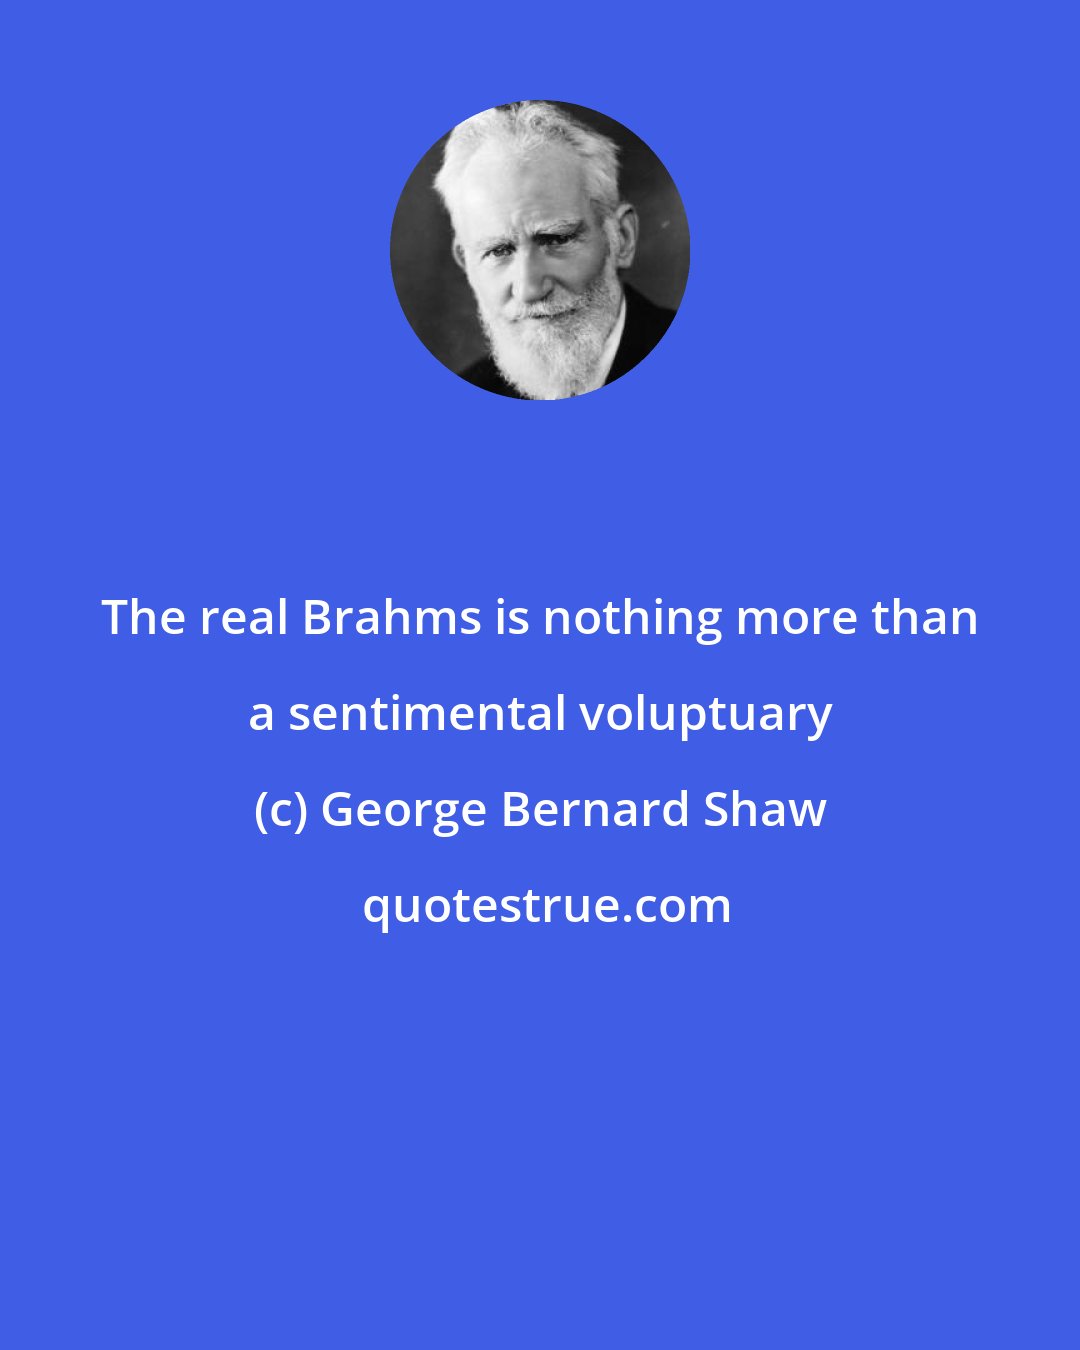 George Bernard Shaw: The real Brahms is nothing more than a sentimental voluptuary